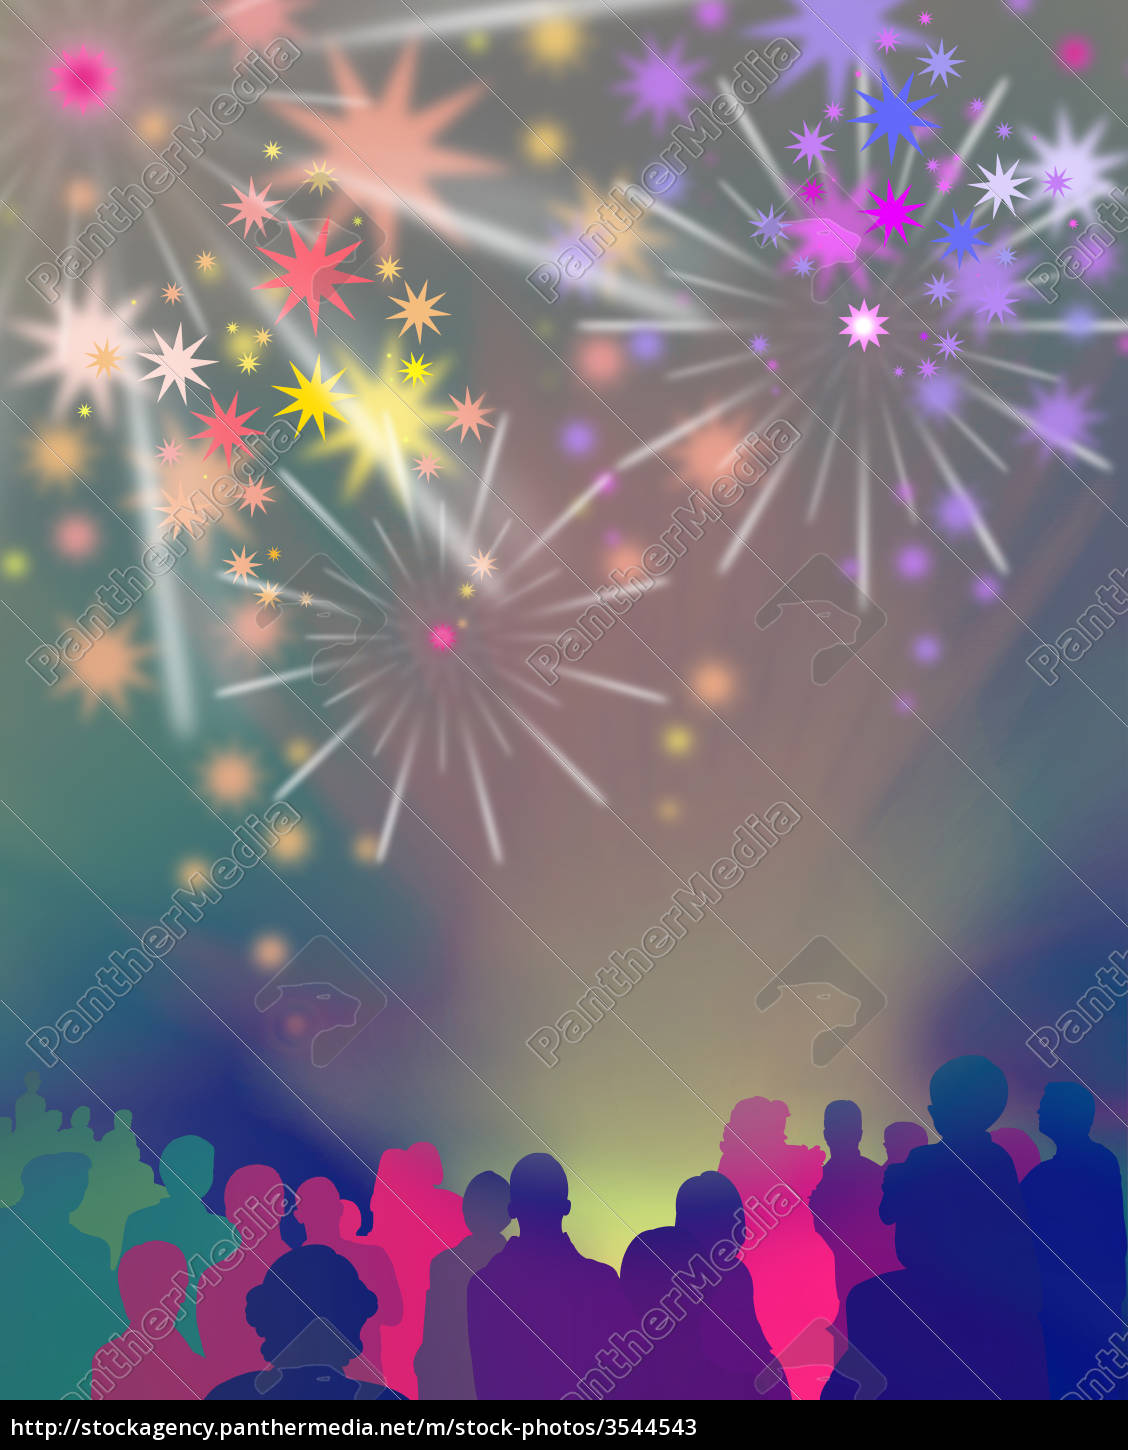 Spectator Event Fireworks Graphic Stock Photo Panthermedia Stock Agency